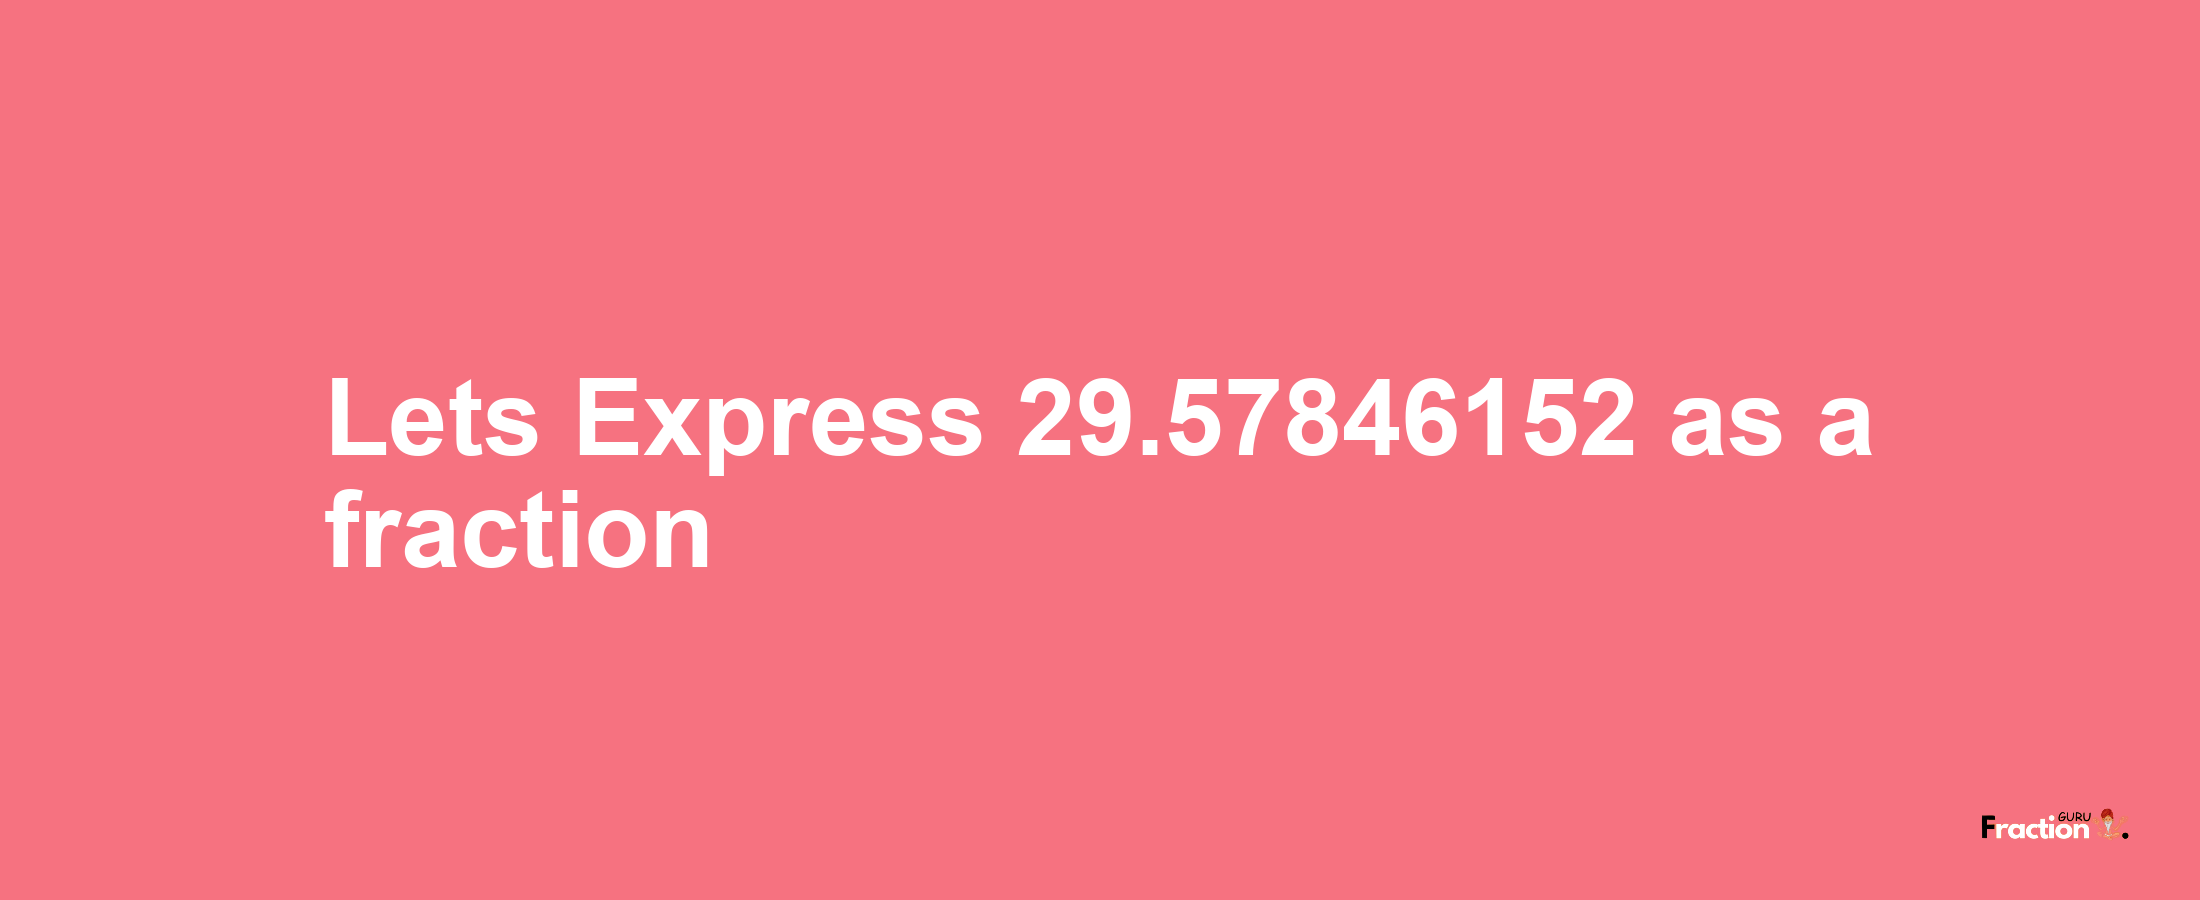 Lets Express 29.57846152 as afraction